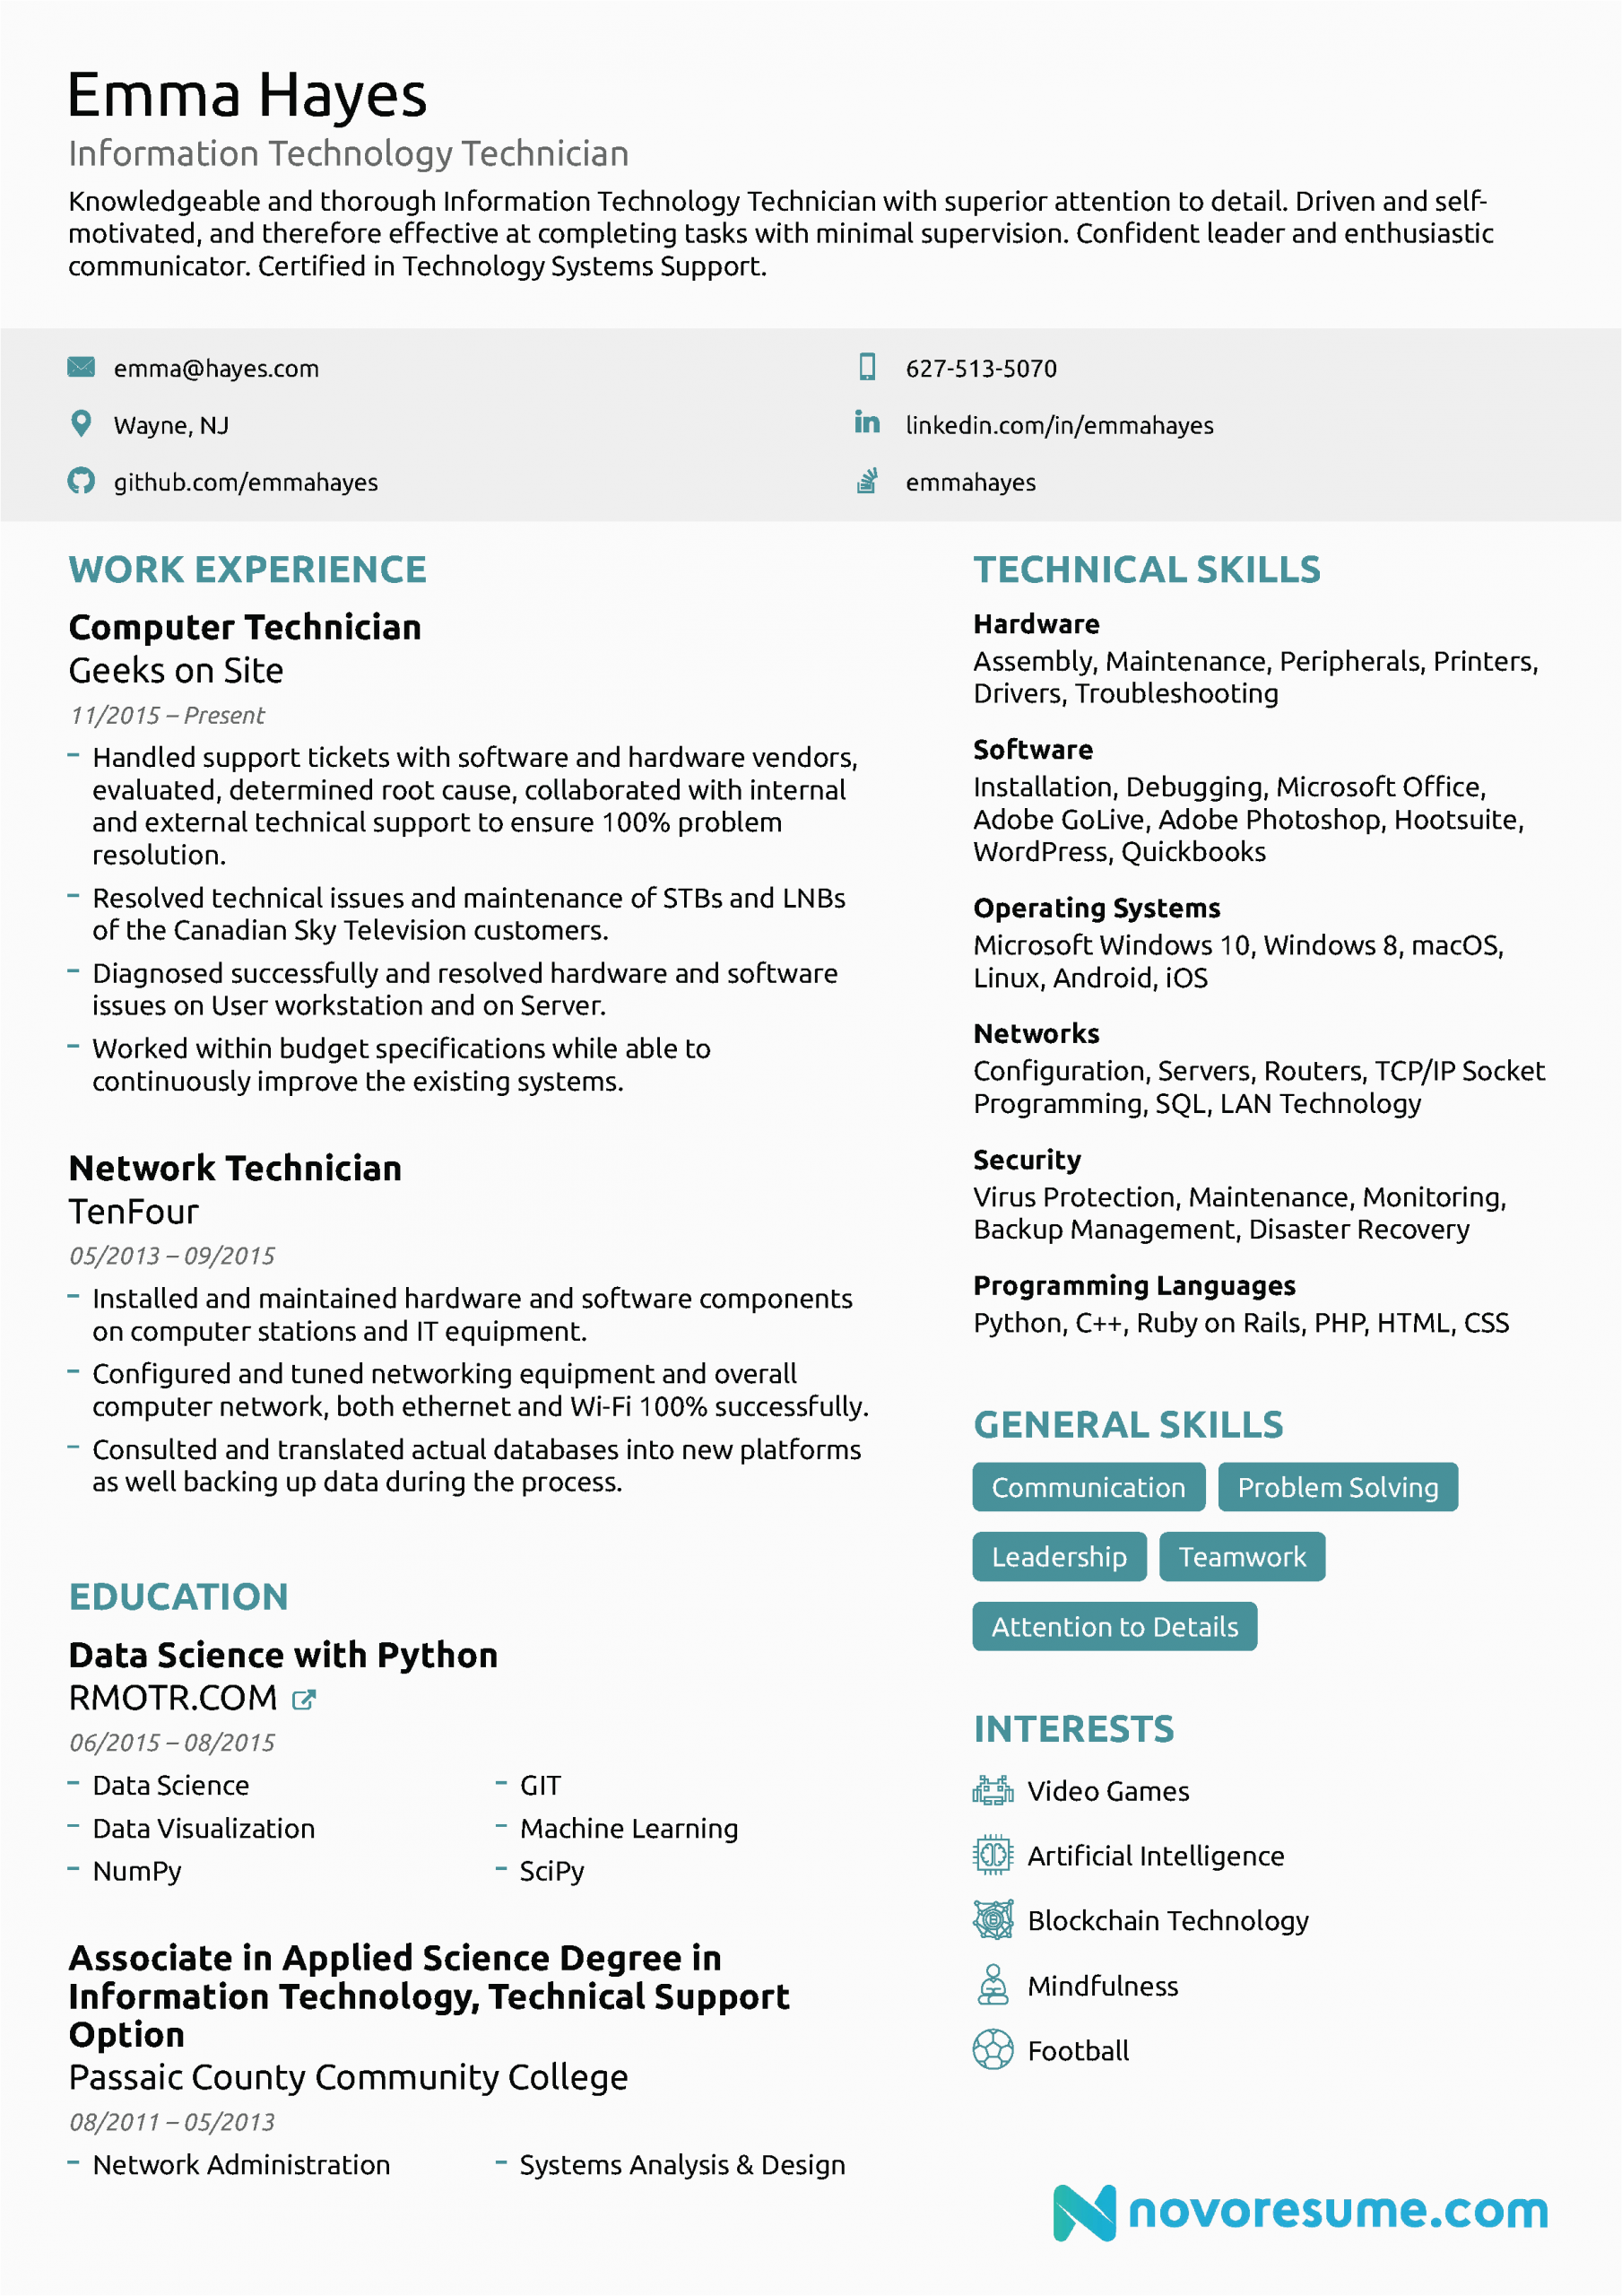 It Professional Resume Examples and Samples It Resume How to Guide for 2021 [11 Samples]